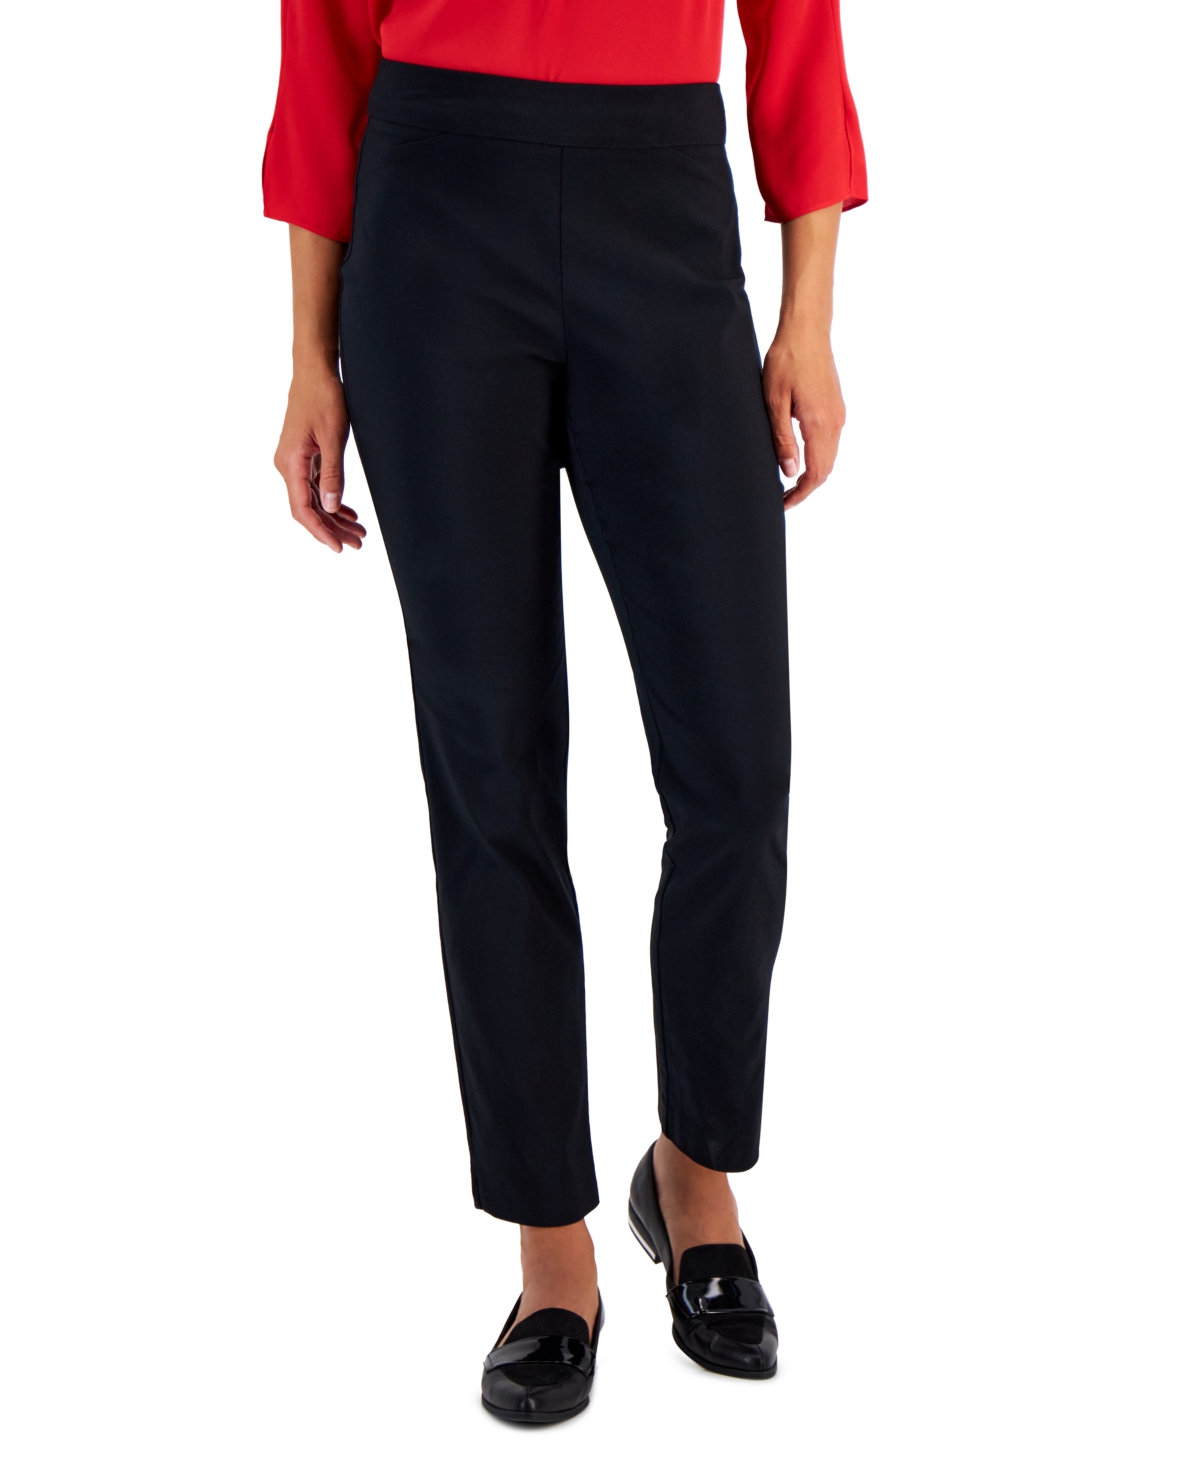 Women's Cambridge Woven Pull-On Pants, Created for Macy's - Claret Rose